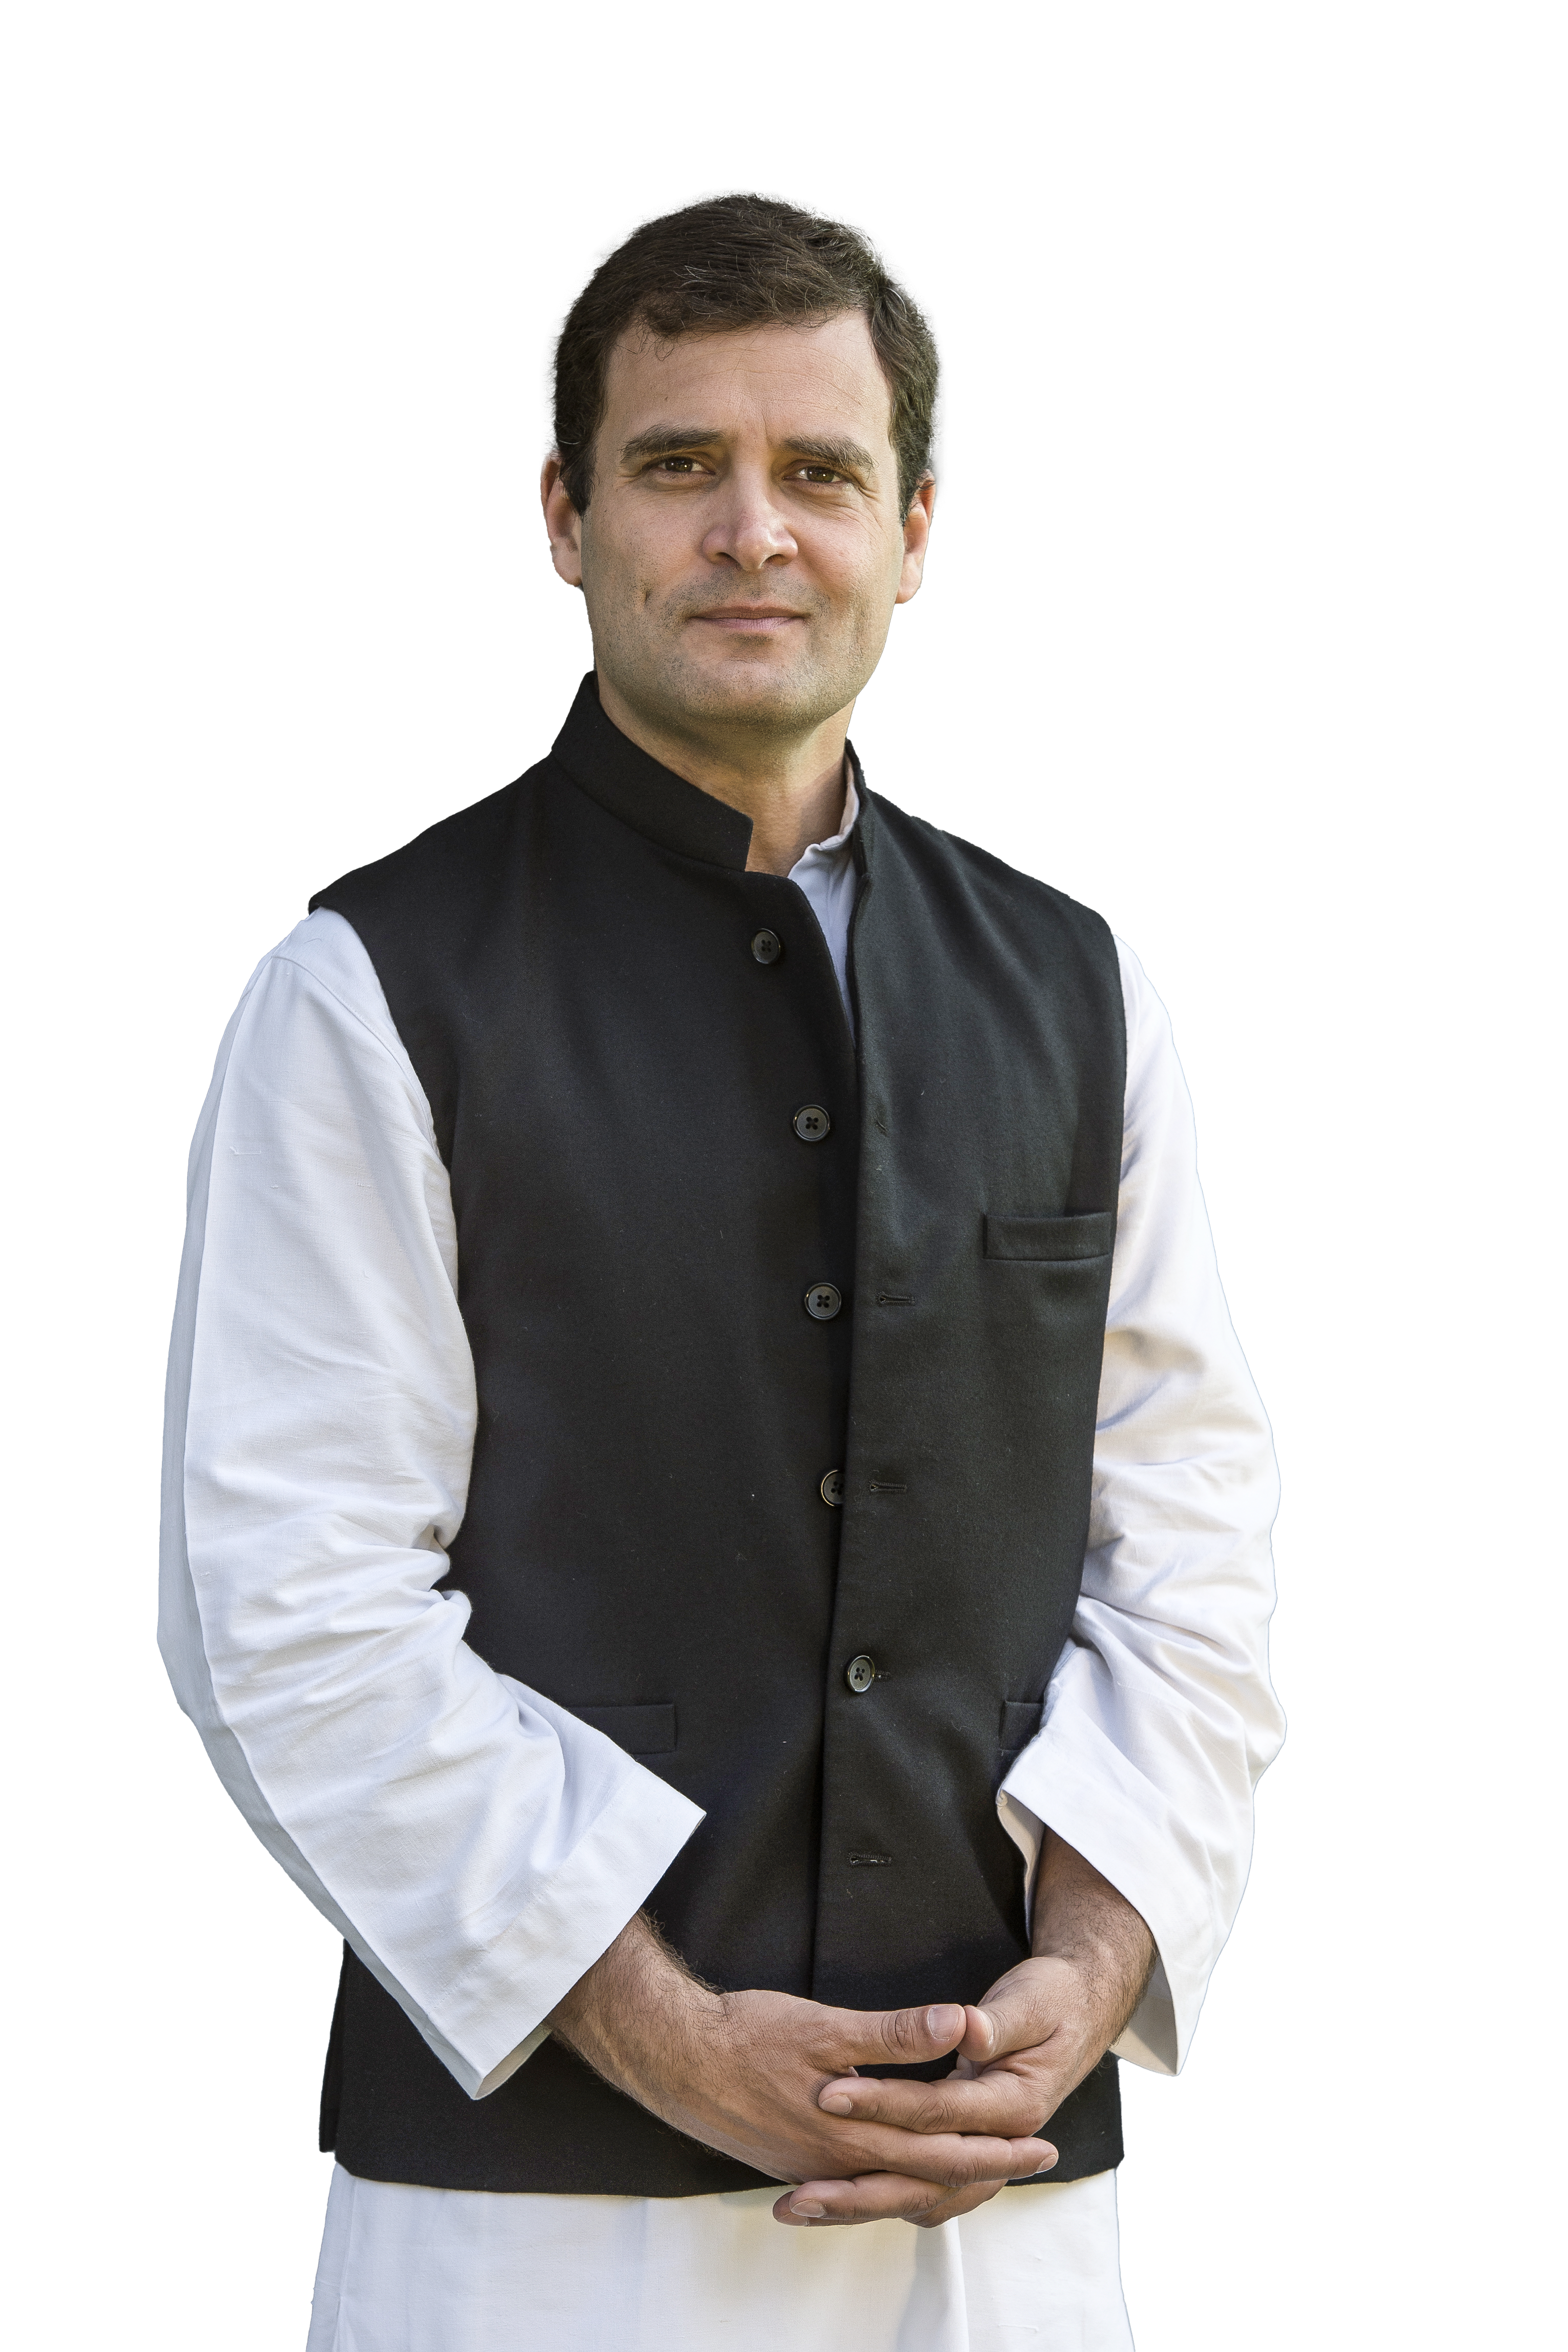 Rahul Gandhi, India's most prominent opposition leader, will speak at a National Press Club in-person Headliners Newsmaker on Thursday, June 1 at 2 p.m.